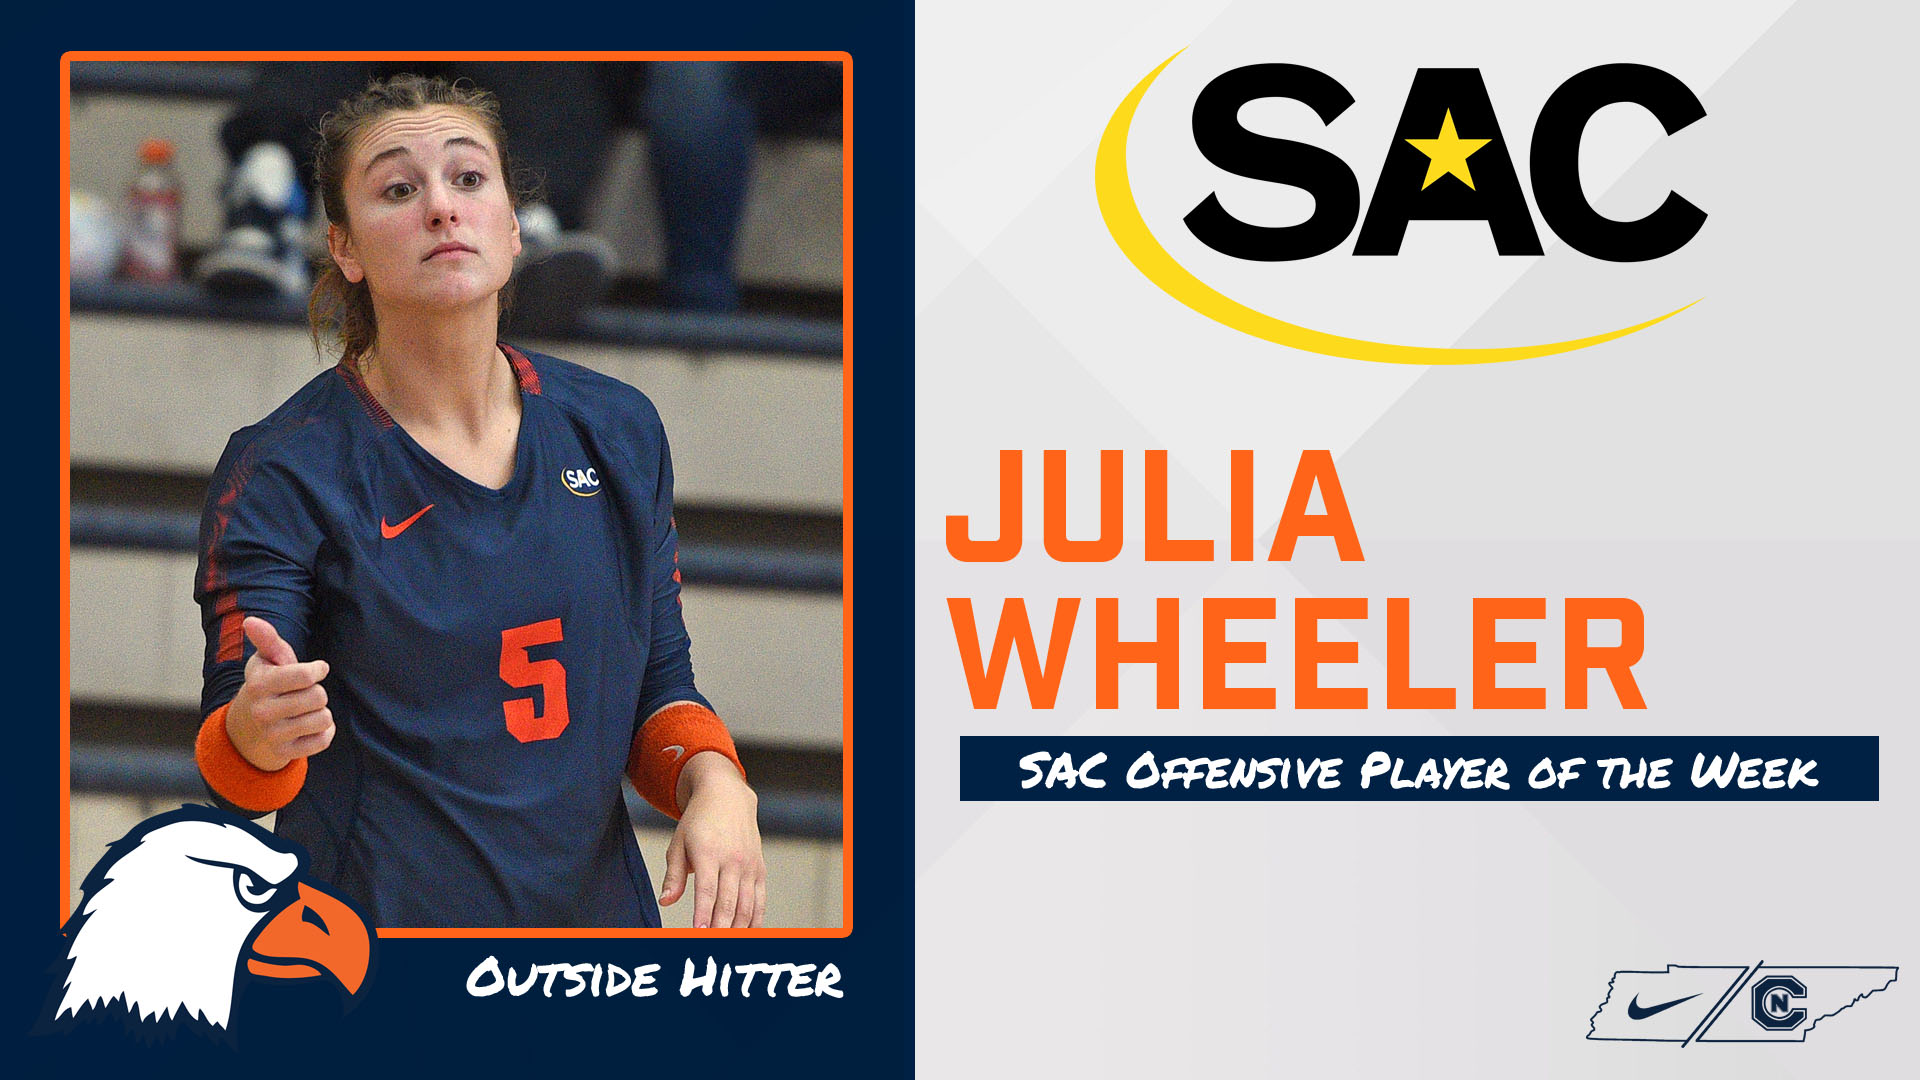 Wheeler snares third SAC Offensive Player of the Week